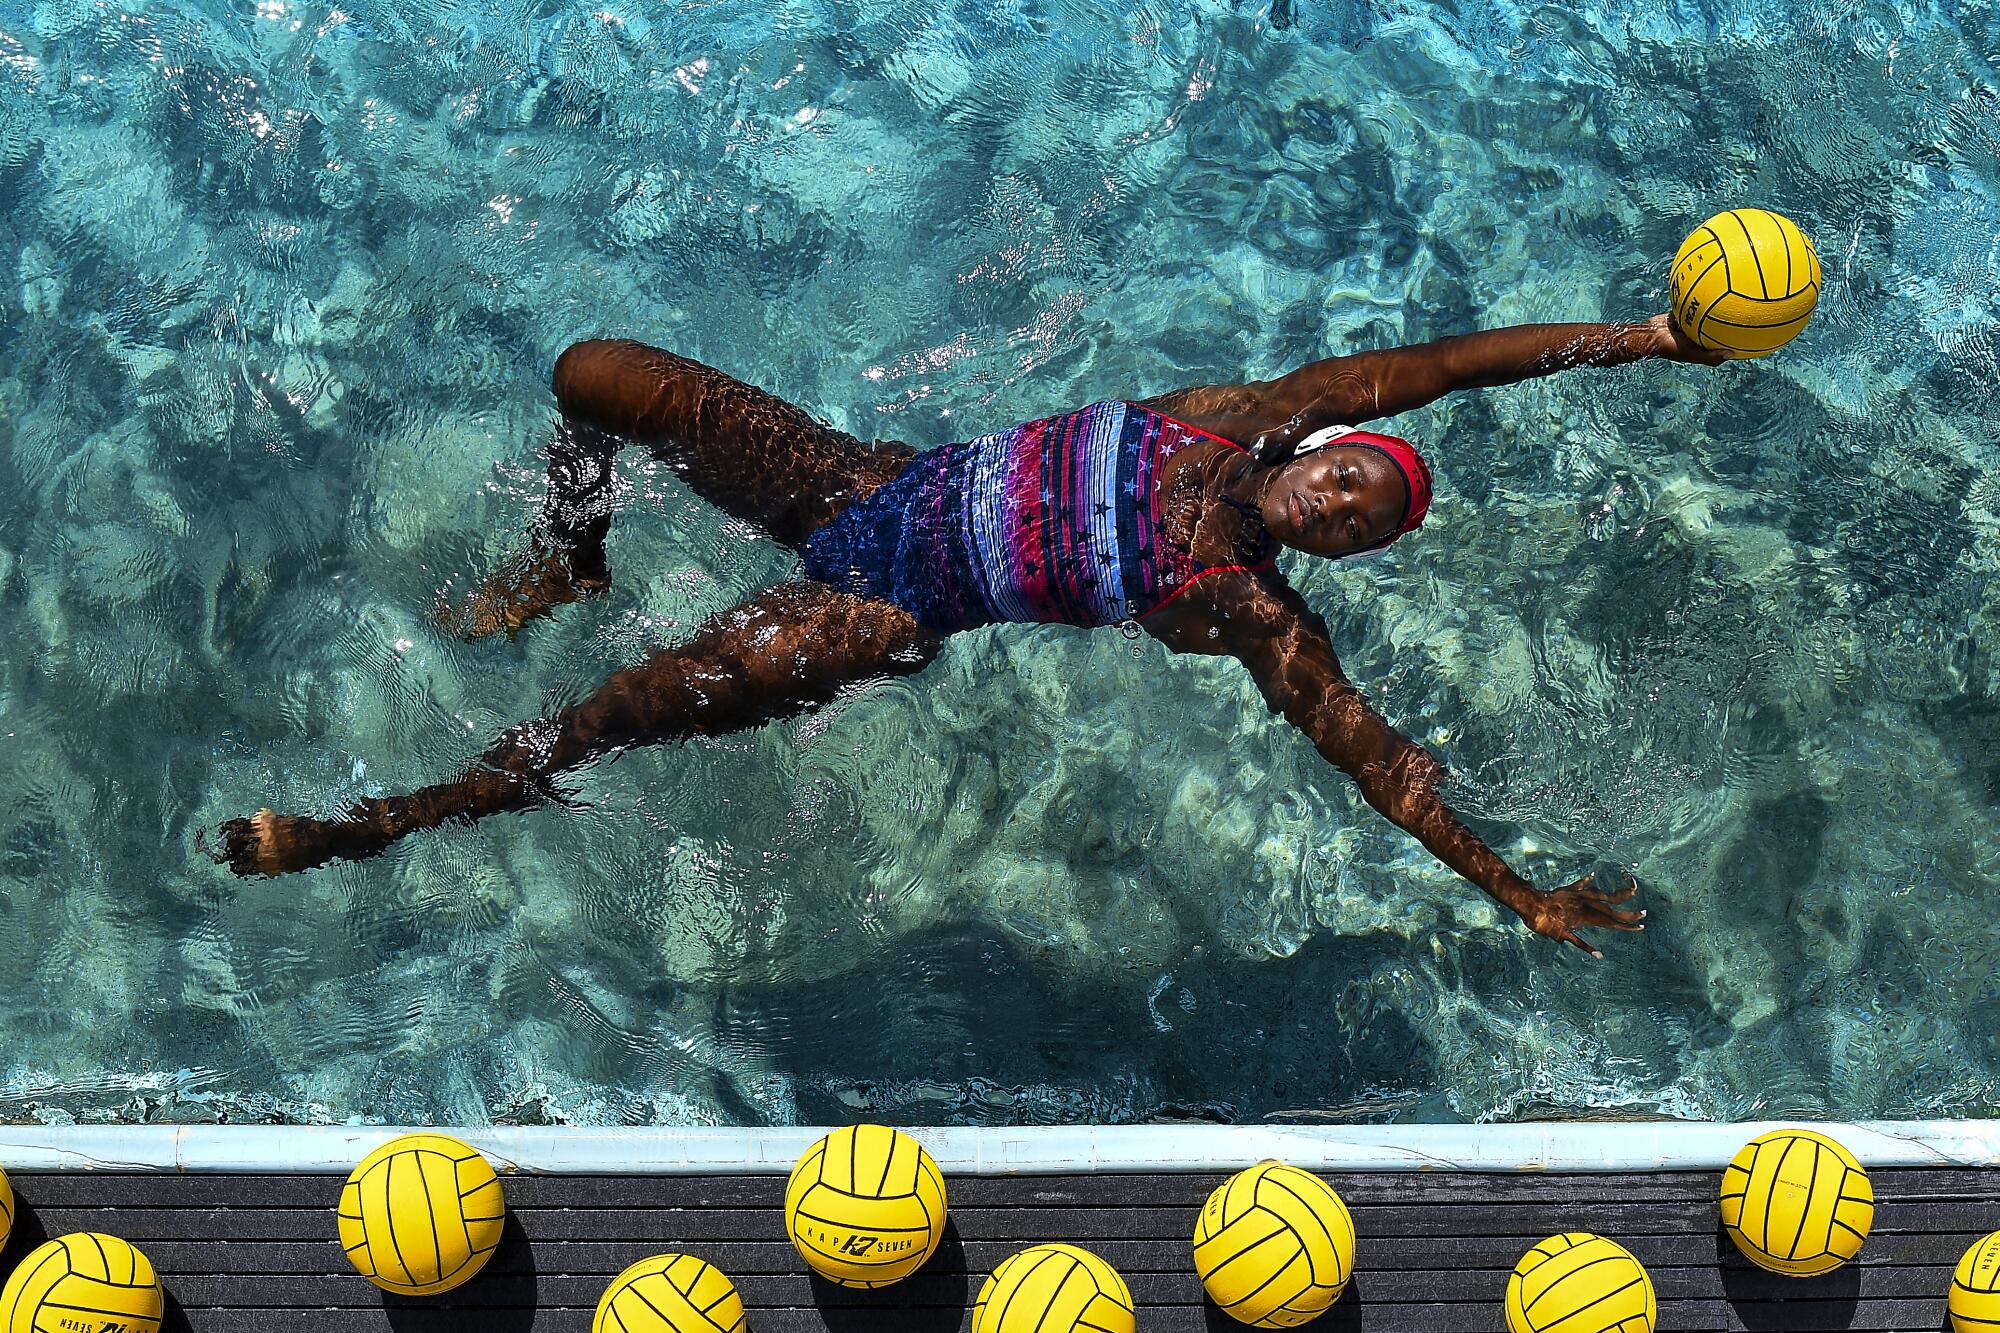 Goalkeeper Ashleigh Johnson, one of only a few non-Californians on the U.S. women's water polo program, has won world championships and Olympic gold medals with the team. Photographed at the Joint Forces Training Base in Los Alamitos, Ca.